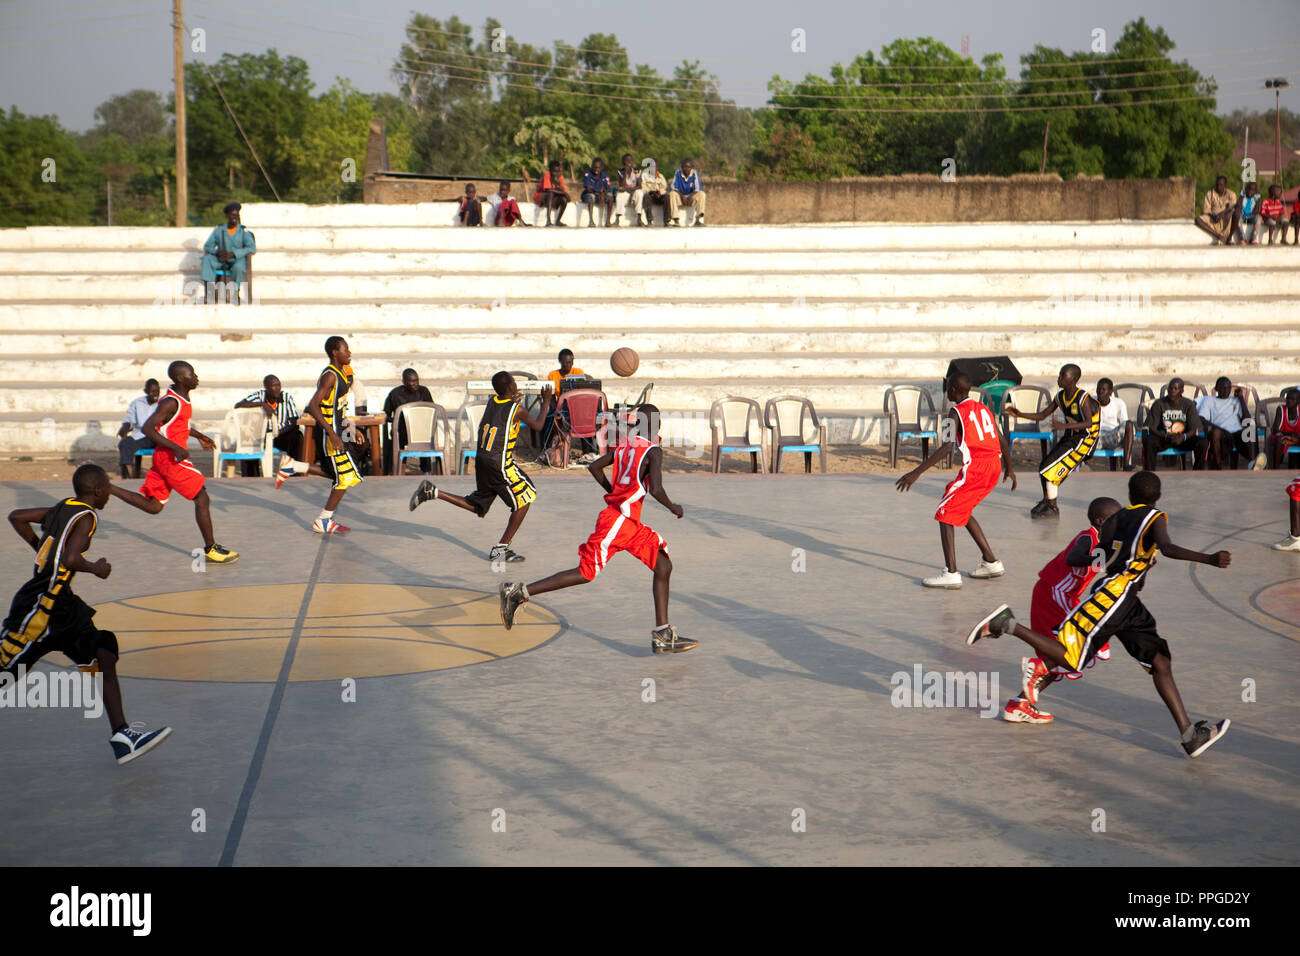 January 7, 2011 - Juba, Sudan - Southern Sudanese basketball players compete in a local match in Juba basketball stadium in Nimra Talata, two days before the start of a landmark vote on independence after five decades of conflict between south and north of Sudan. If there is one thing south Sudan is famous for in the outside world, it is the super lofty stars with which it has studded the NBA and now, as nationhood beckons, it is basketball that it is looking to make a name in international sports. Photo credit: Benedicte Desrus Stock Photo